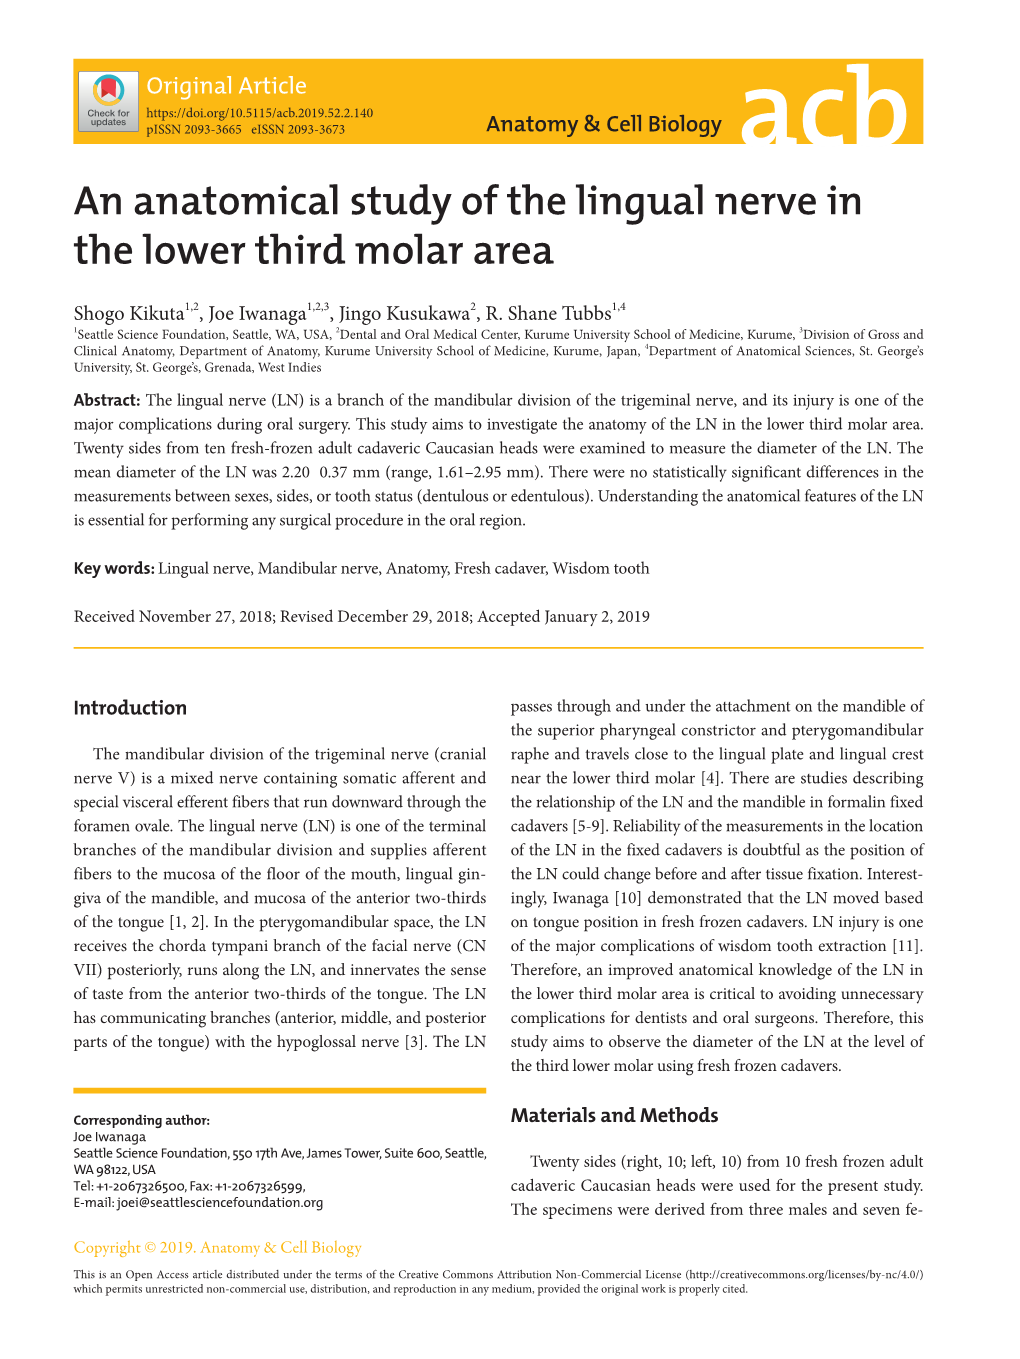 An Anatomical Study of the Lingual Nerve in the Lower Third Molar Area